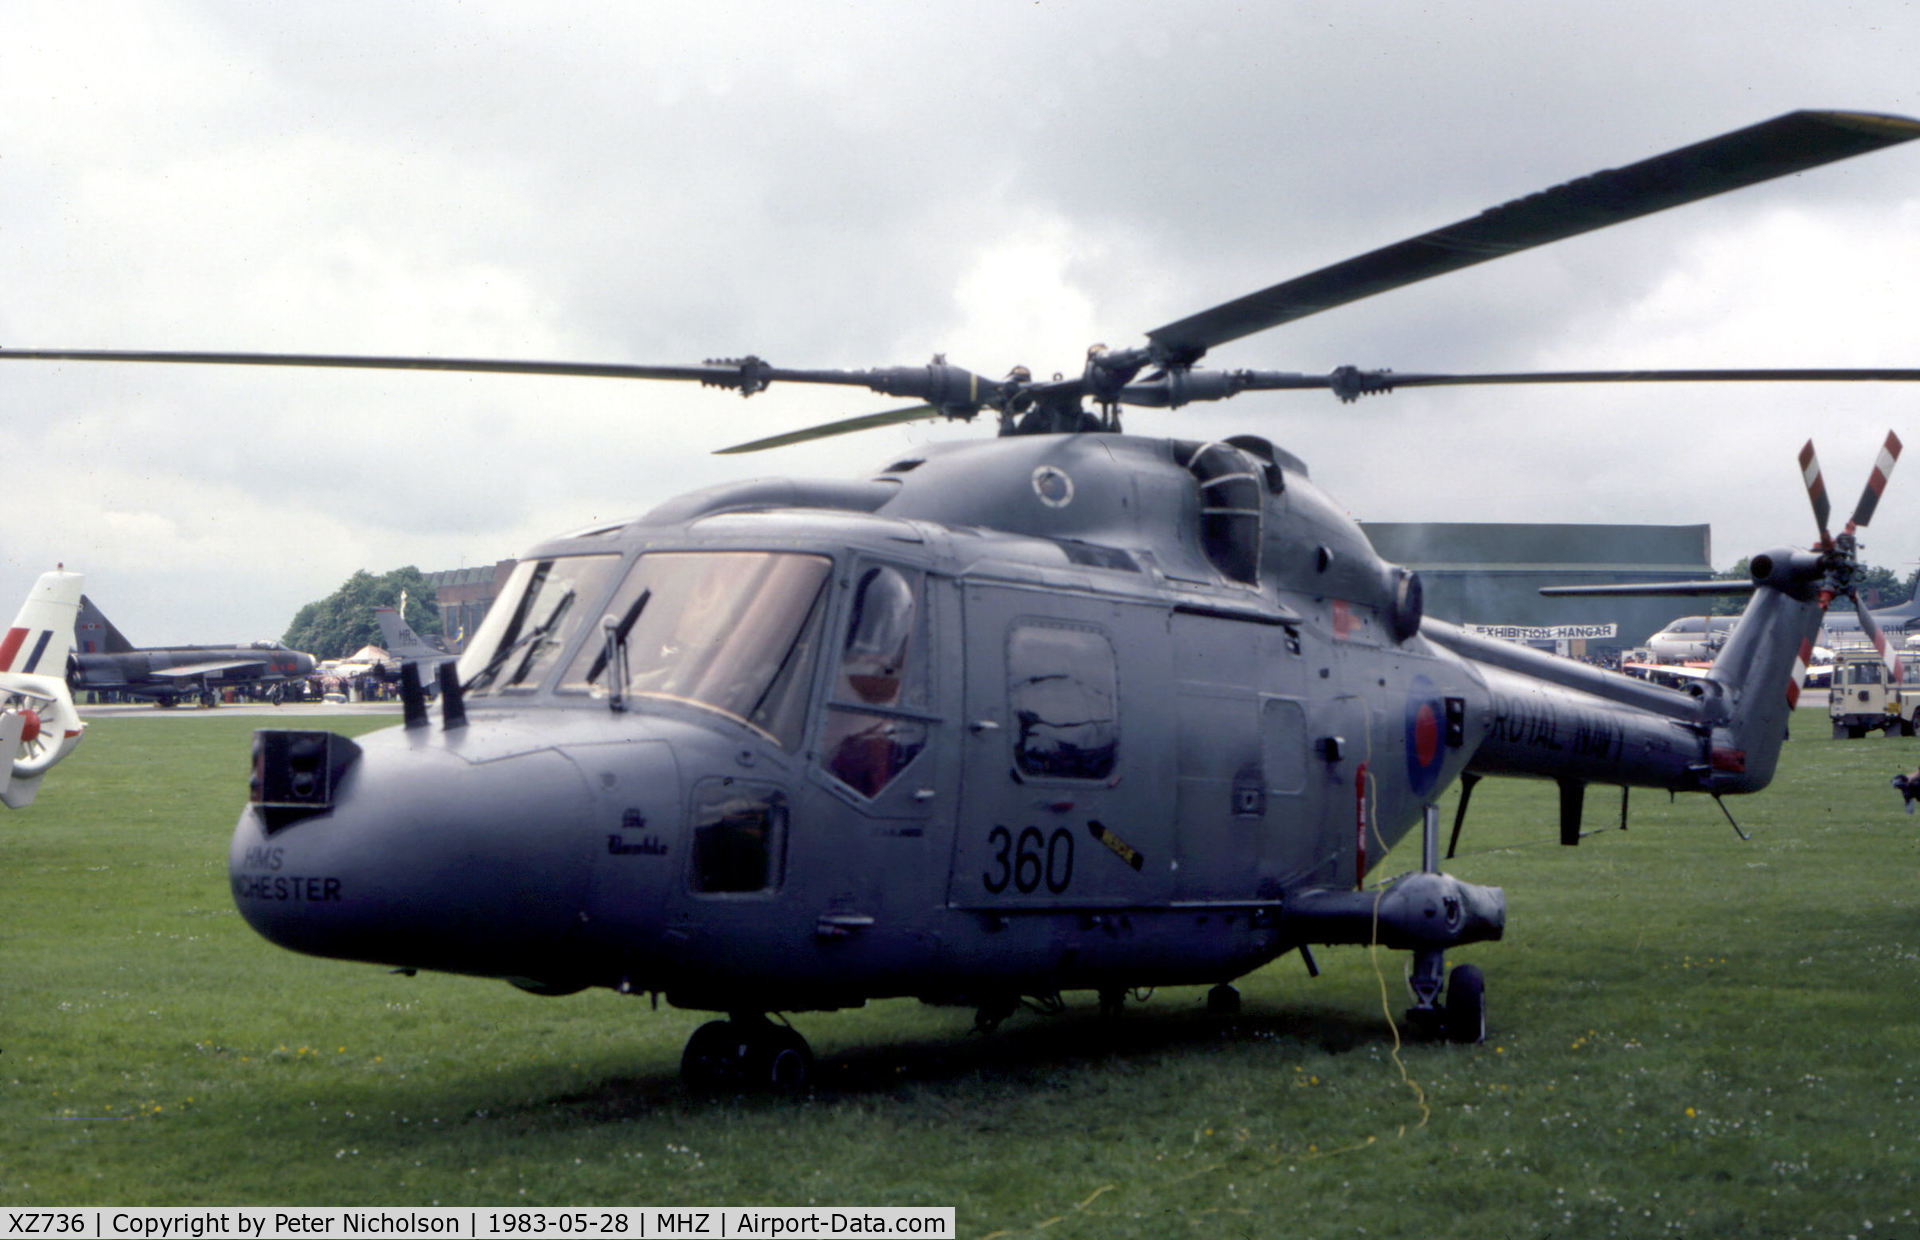 XZ736, 1981 Westland Lynx HAS.2 C/N 222, Lynx HAS.2 named Bumble of 815 Squadron aboard HMS Manchester on display at the 1983 RAF Mildenhall Air Fete.